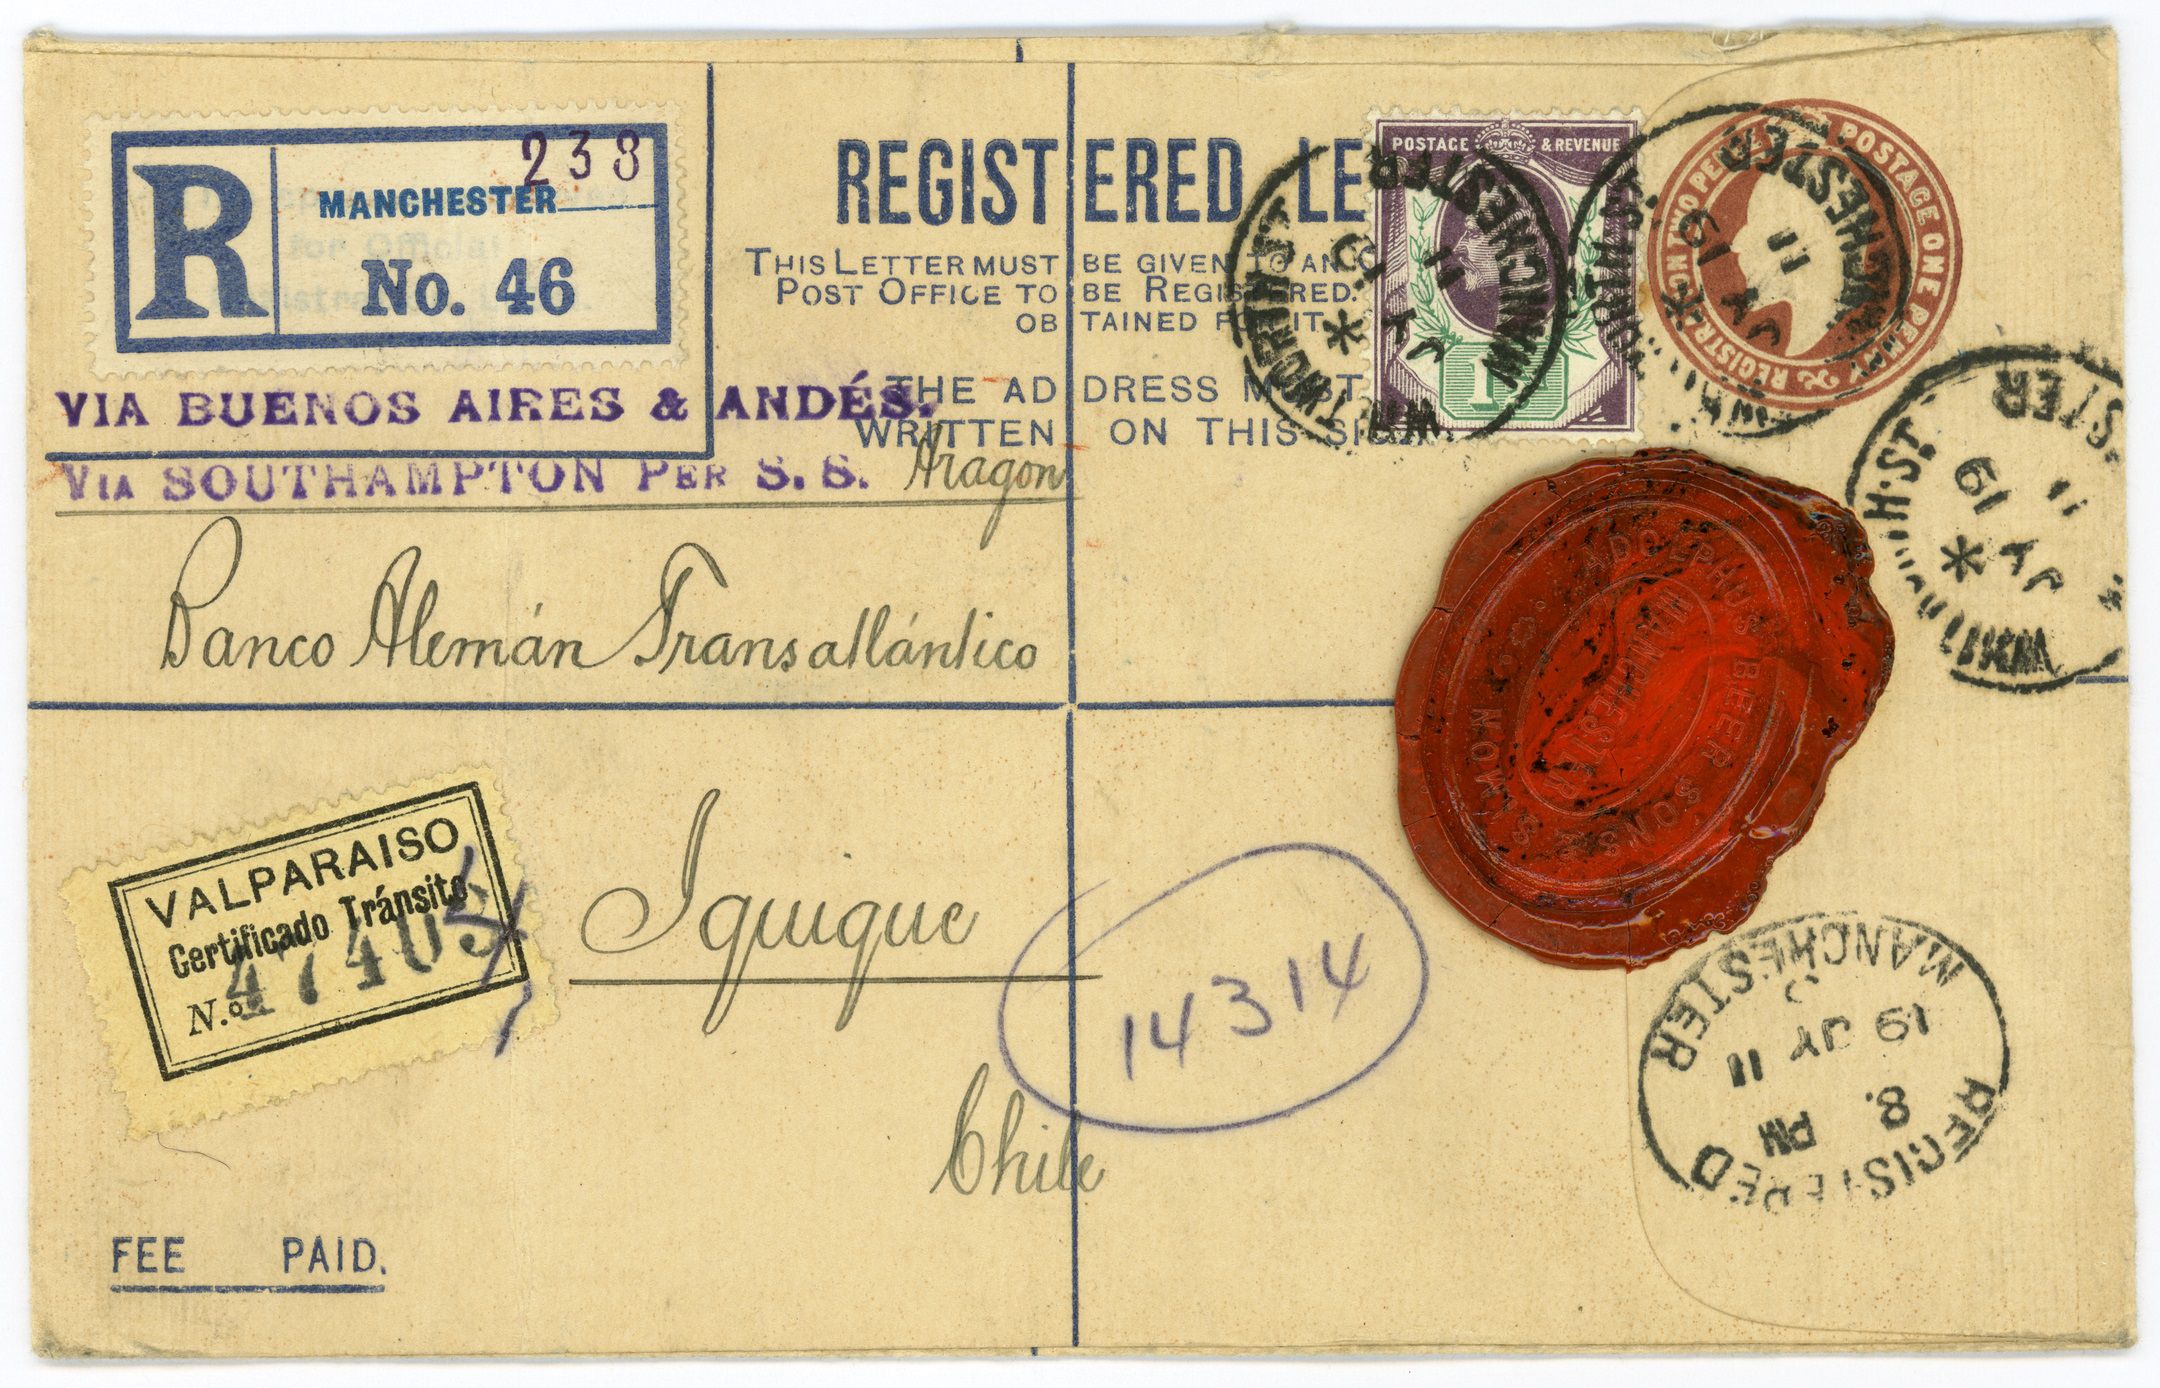 What Are Collectible Stamp Covers?